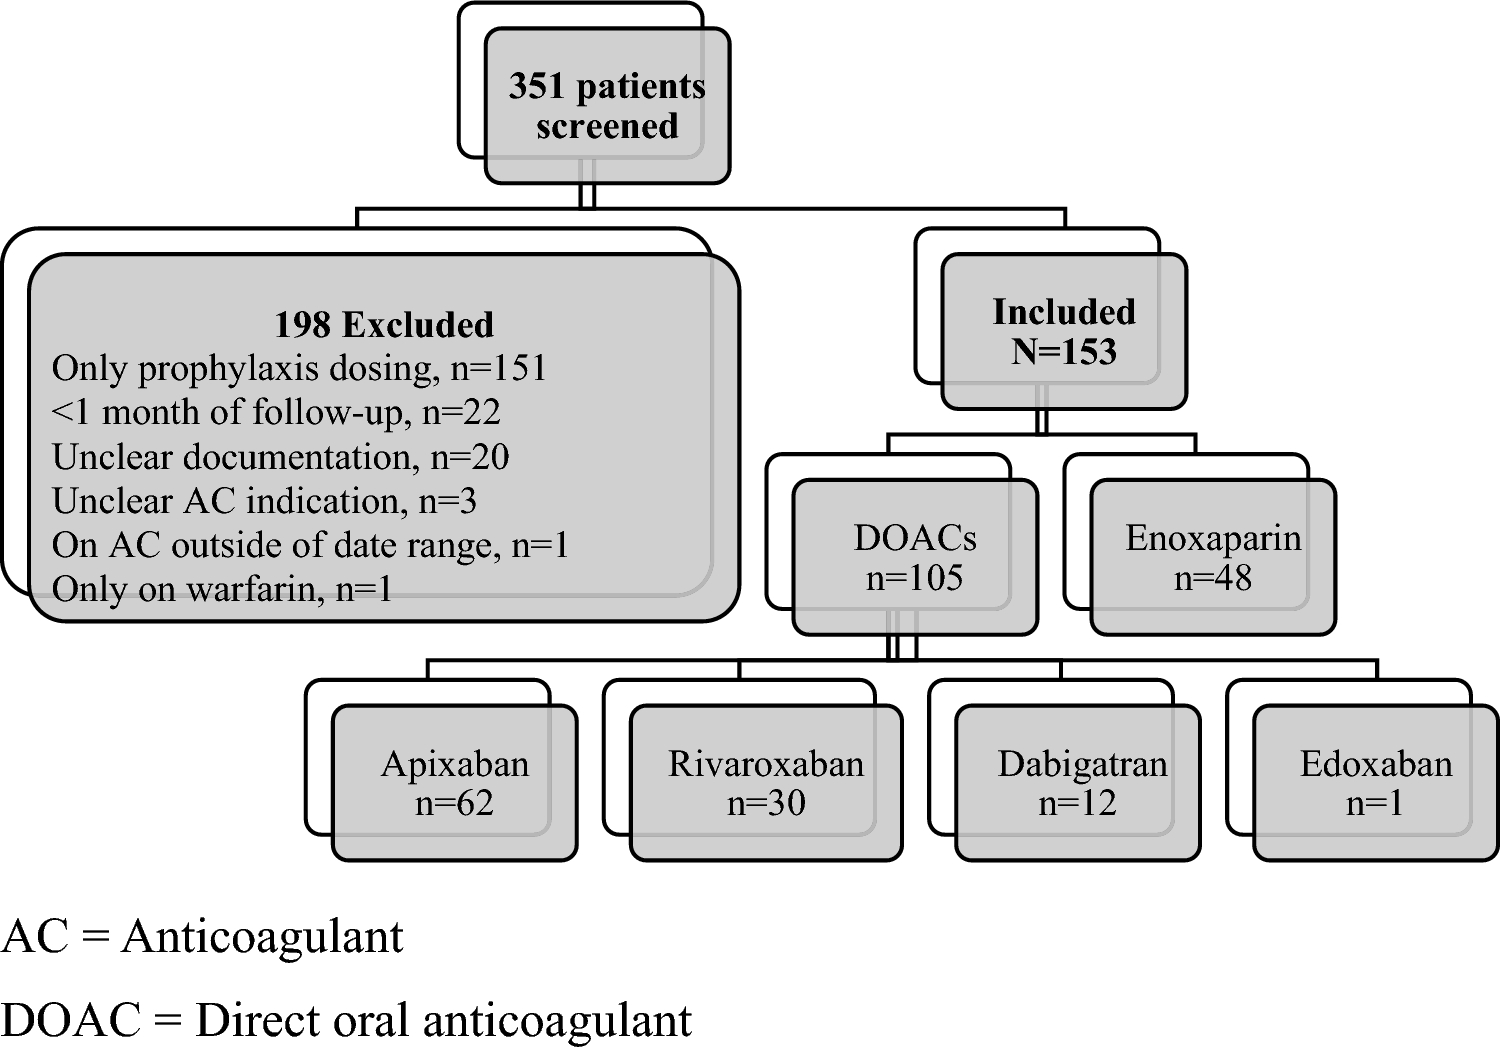 Anticoagulant prescribing patterns in patients with primary central nervous system malignancies and secondary metastases